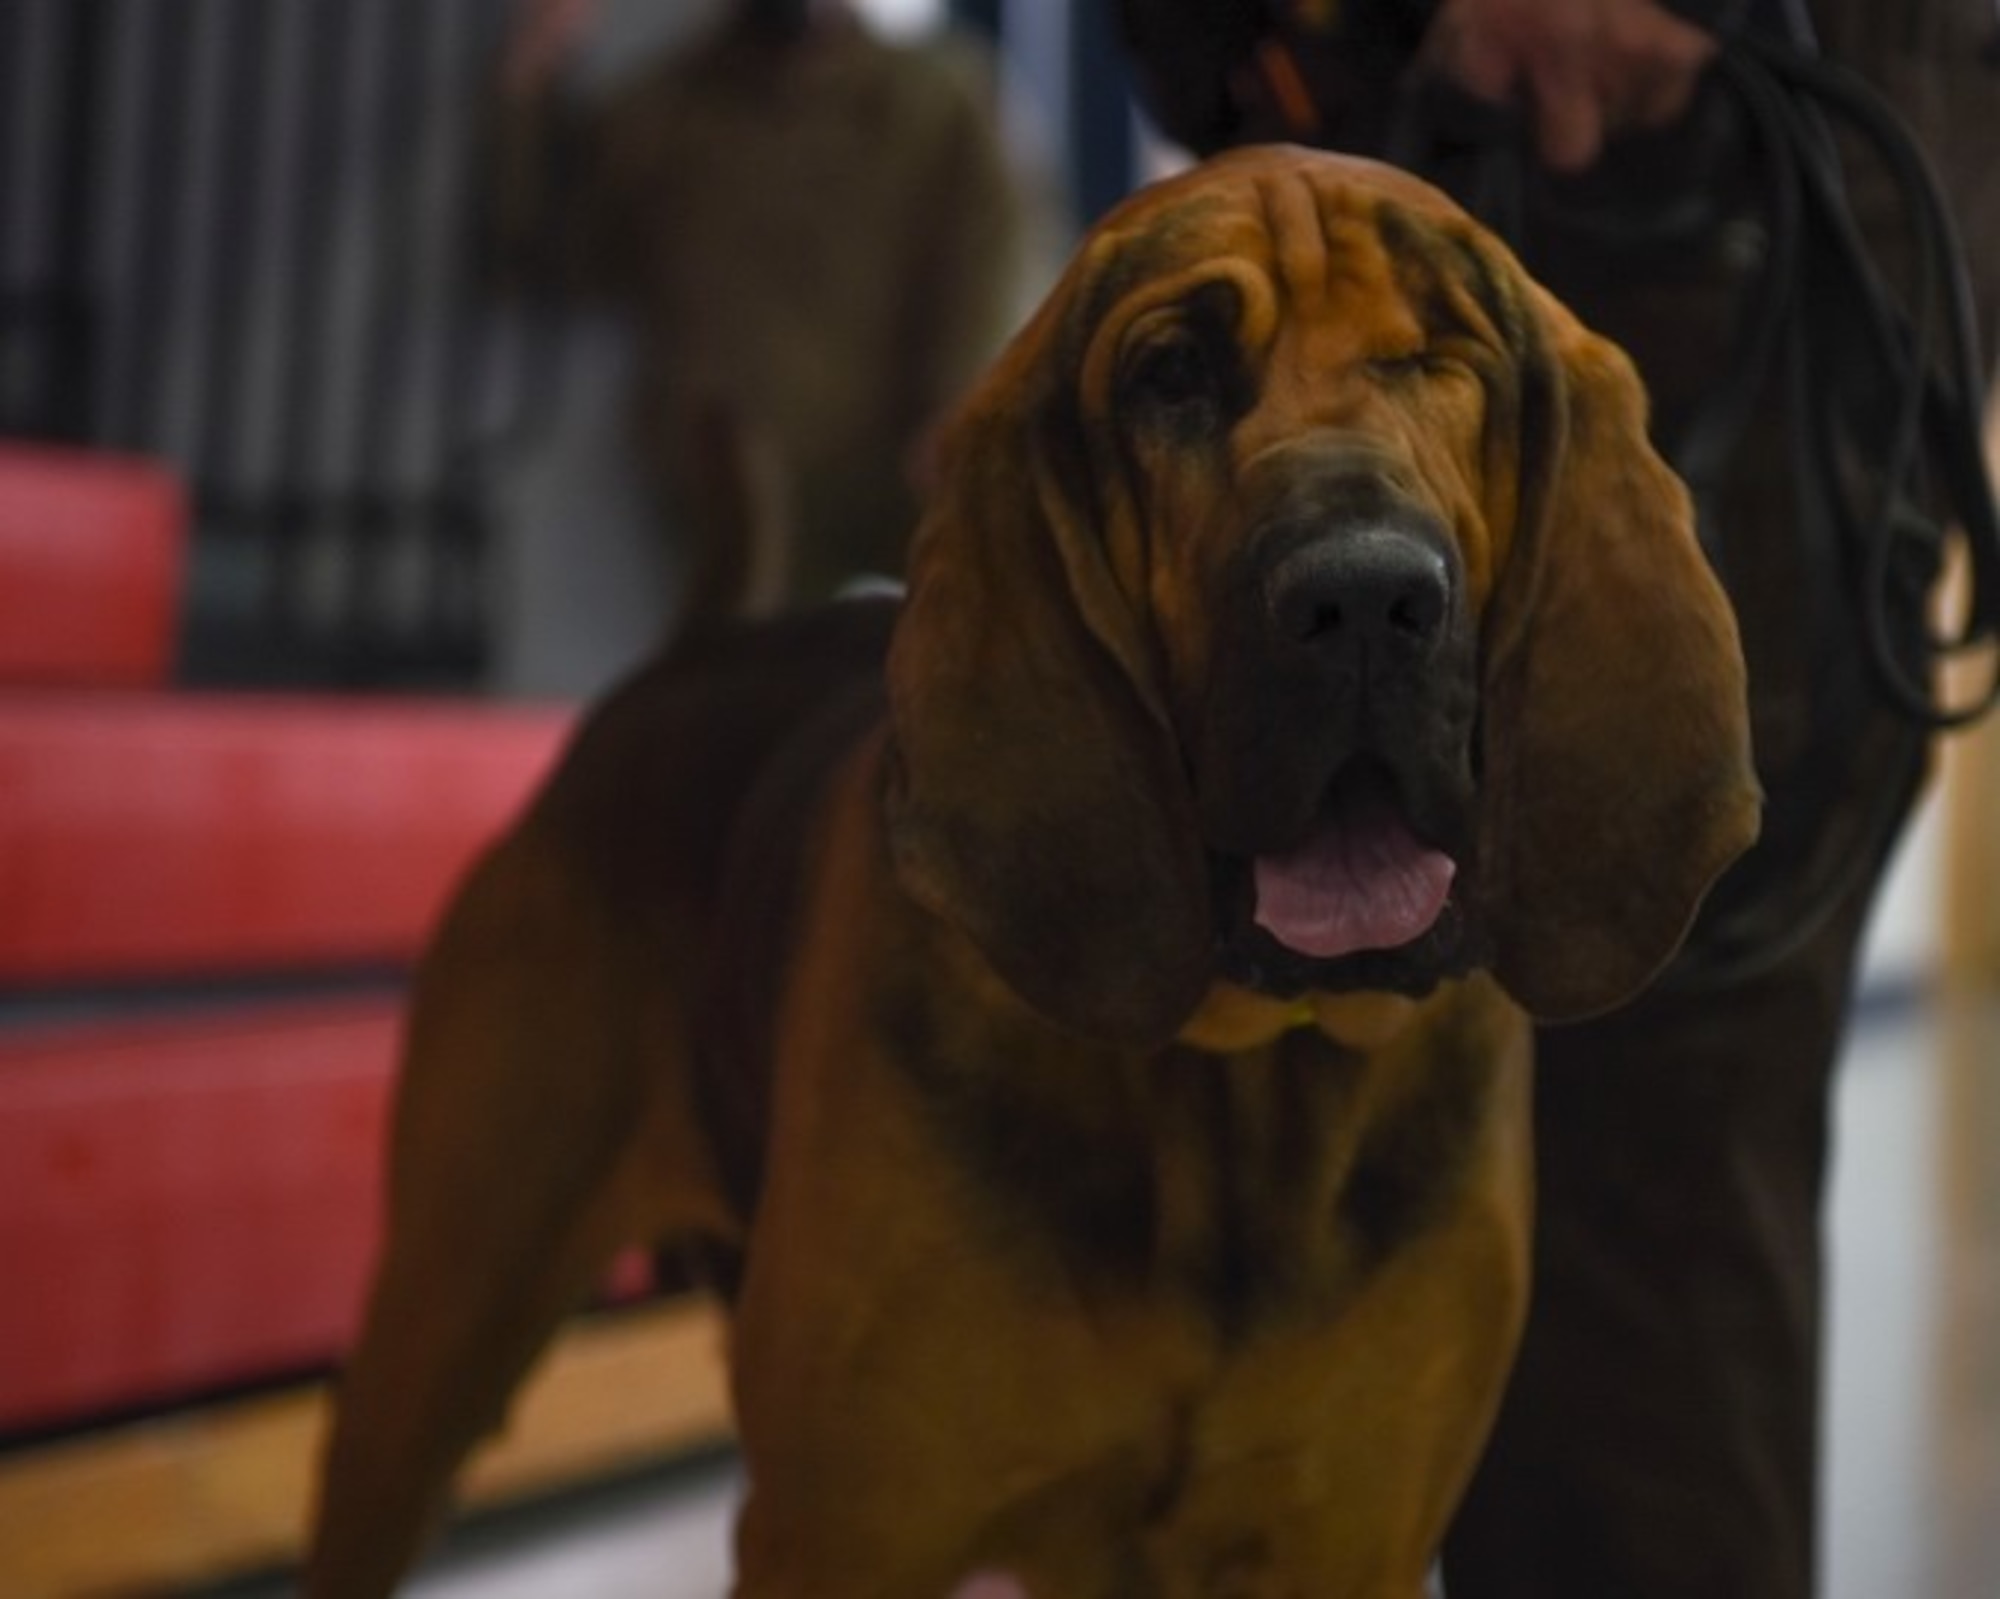 A bloodhound stands, looking into the camera.